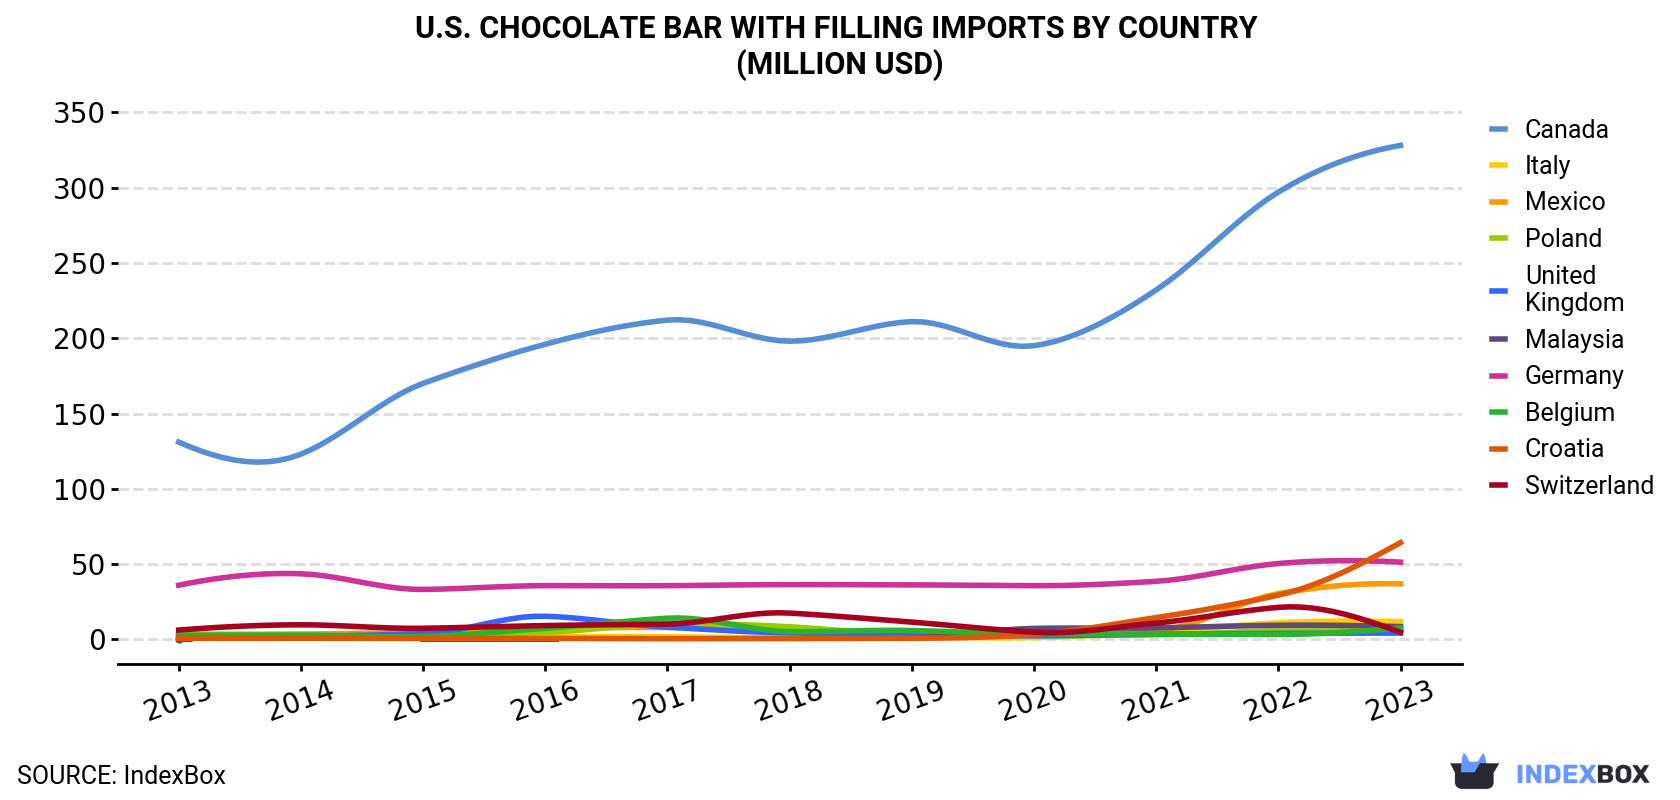 U.S. Chocolate Bar With Filling Imports By Country (Million USD)